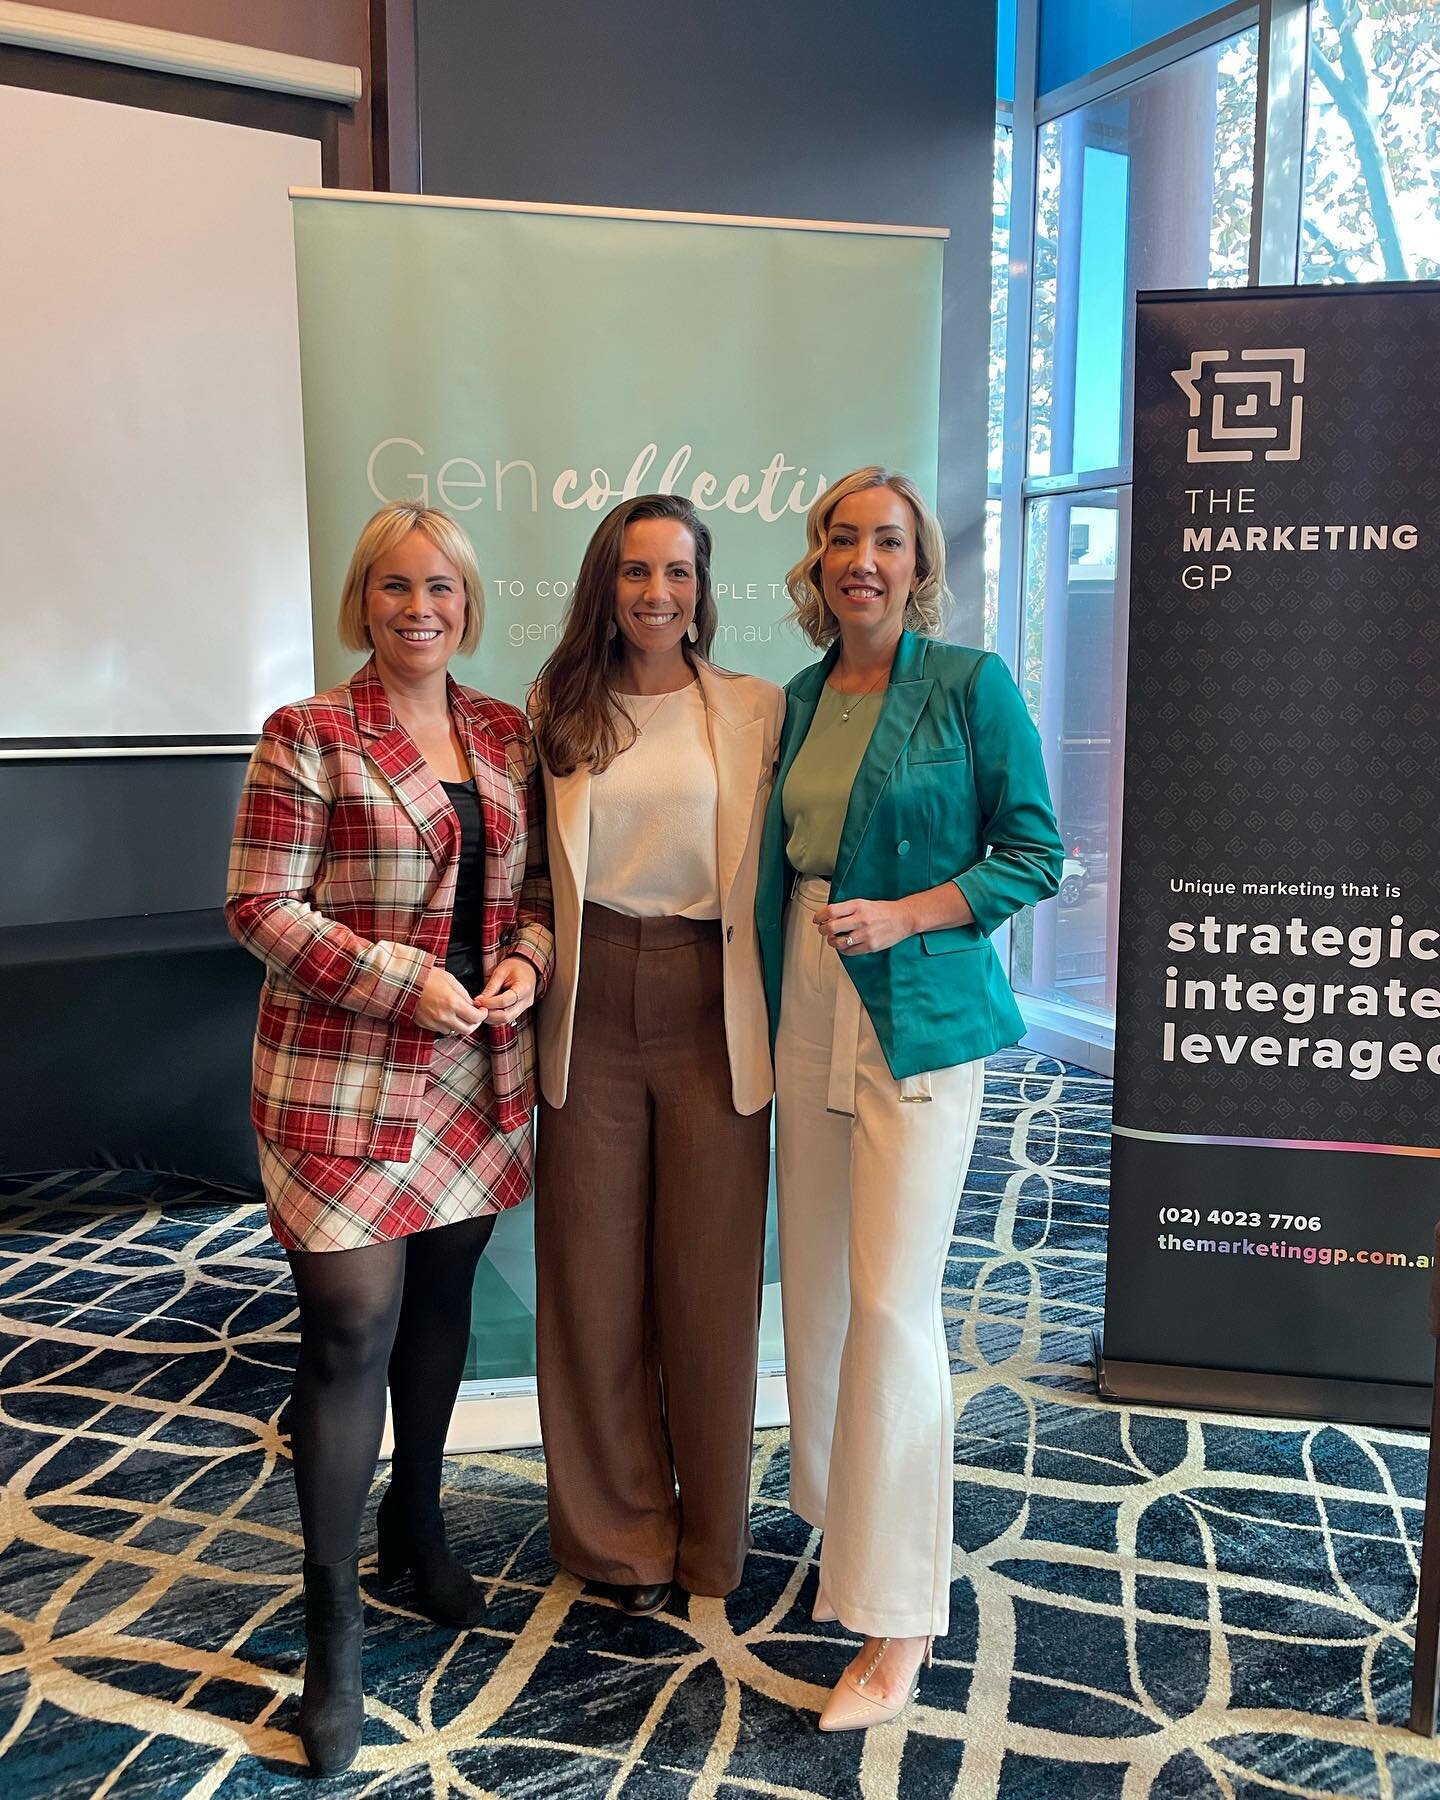 What a brilliant event this morning 👏🏼

We would like to say another big thank you to our panelists @justholly_ and @lyndallallan_saltproperty who shared with us some great insights into personal branding.

The room was buzzing with excitement and 